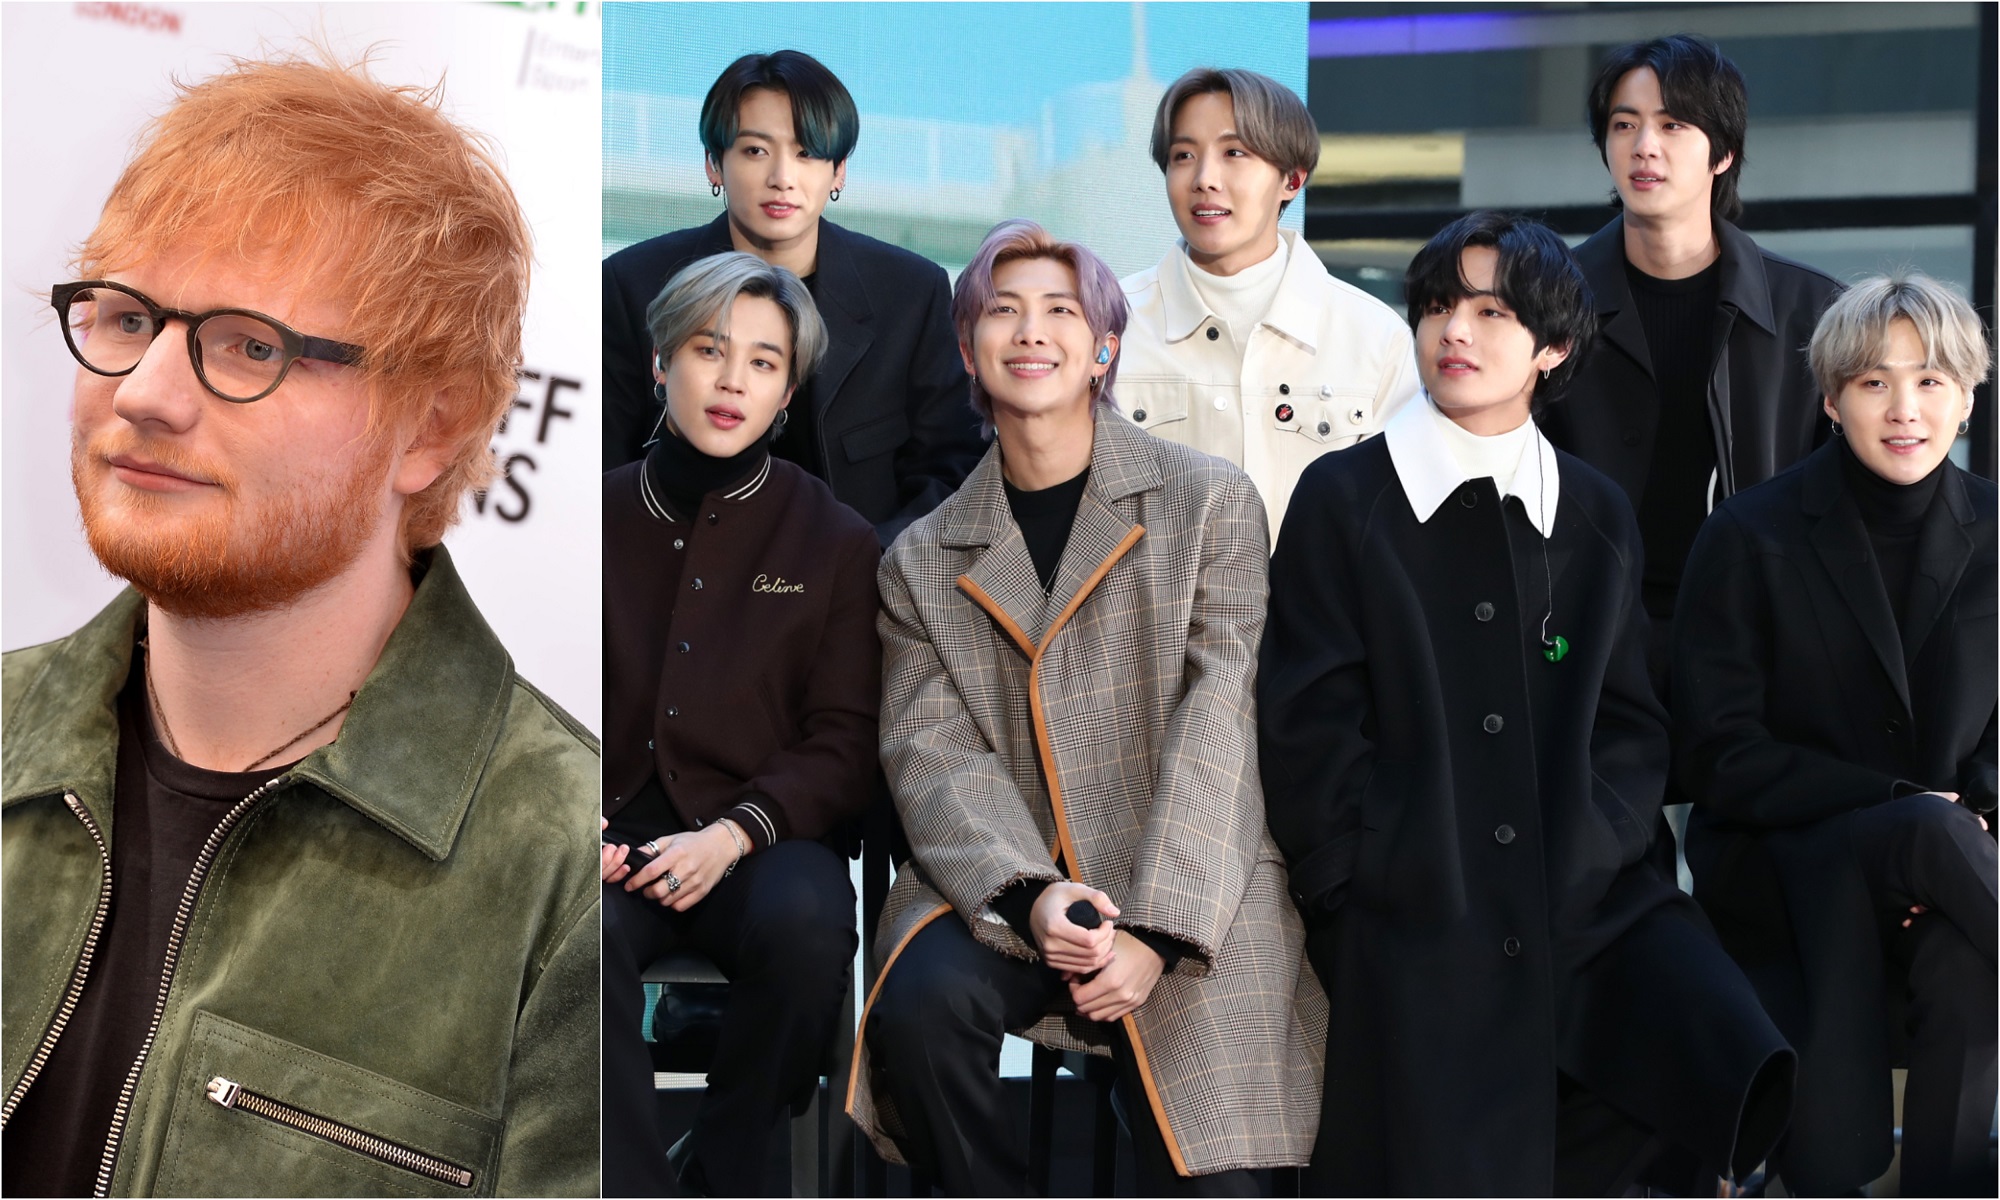 A joined photo of Ed Sheeran in 2019 and Jimin, Jungkook, RM, J-Hope, V, Jin, and Suga of BTS in 2020